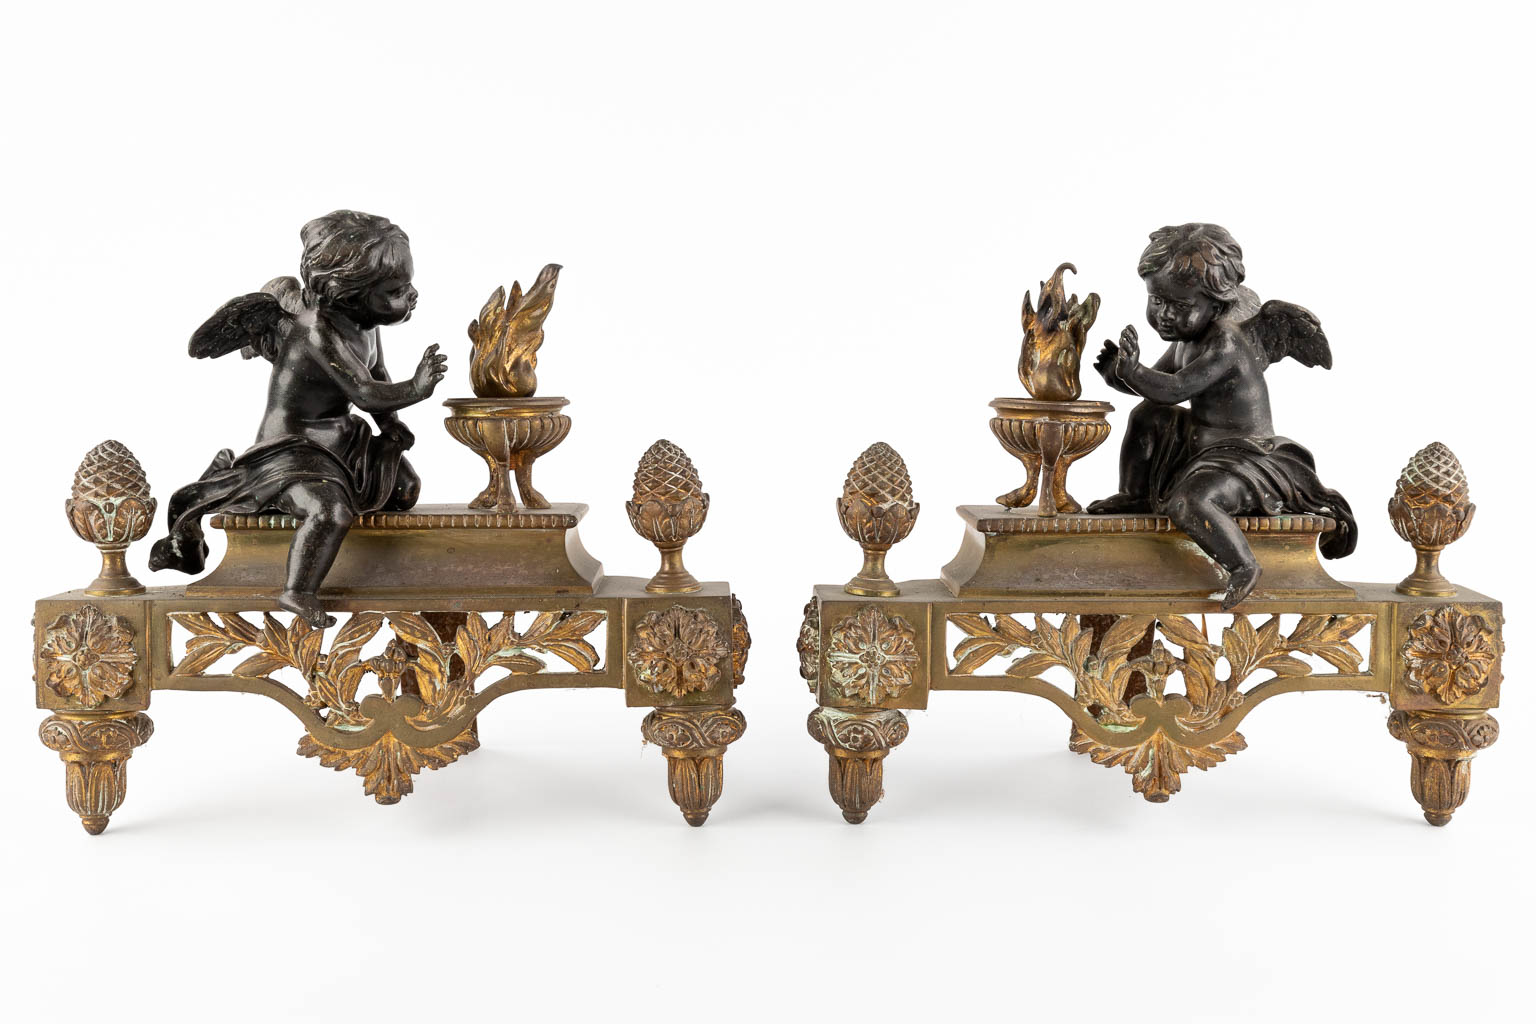 A pair of bronze fireplace andirons, gilt and patinated bronze, Louis XVI style. Circa 1900. (W:30 x H:27 cm)